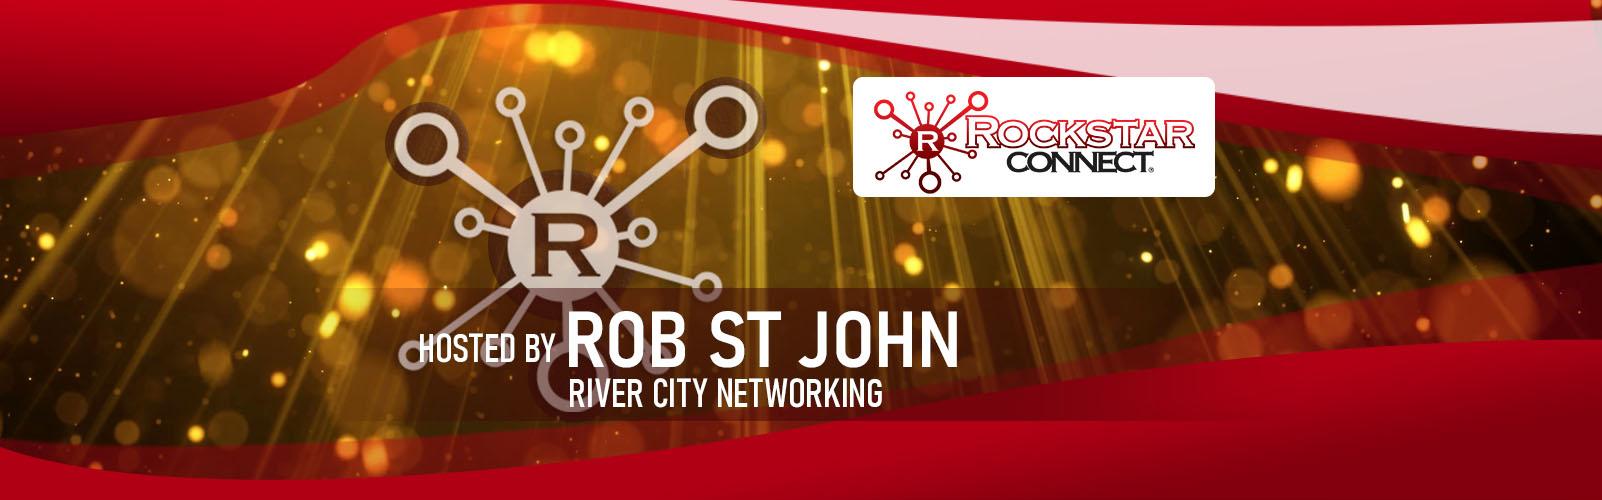 Free River City Rockstar Connect Networking Event (Jan., near Louisville)